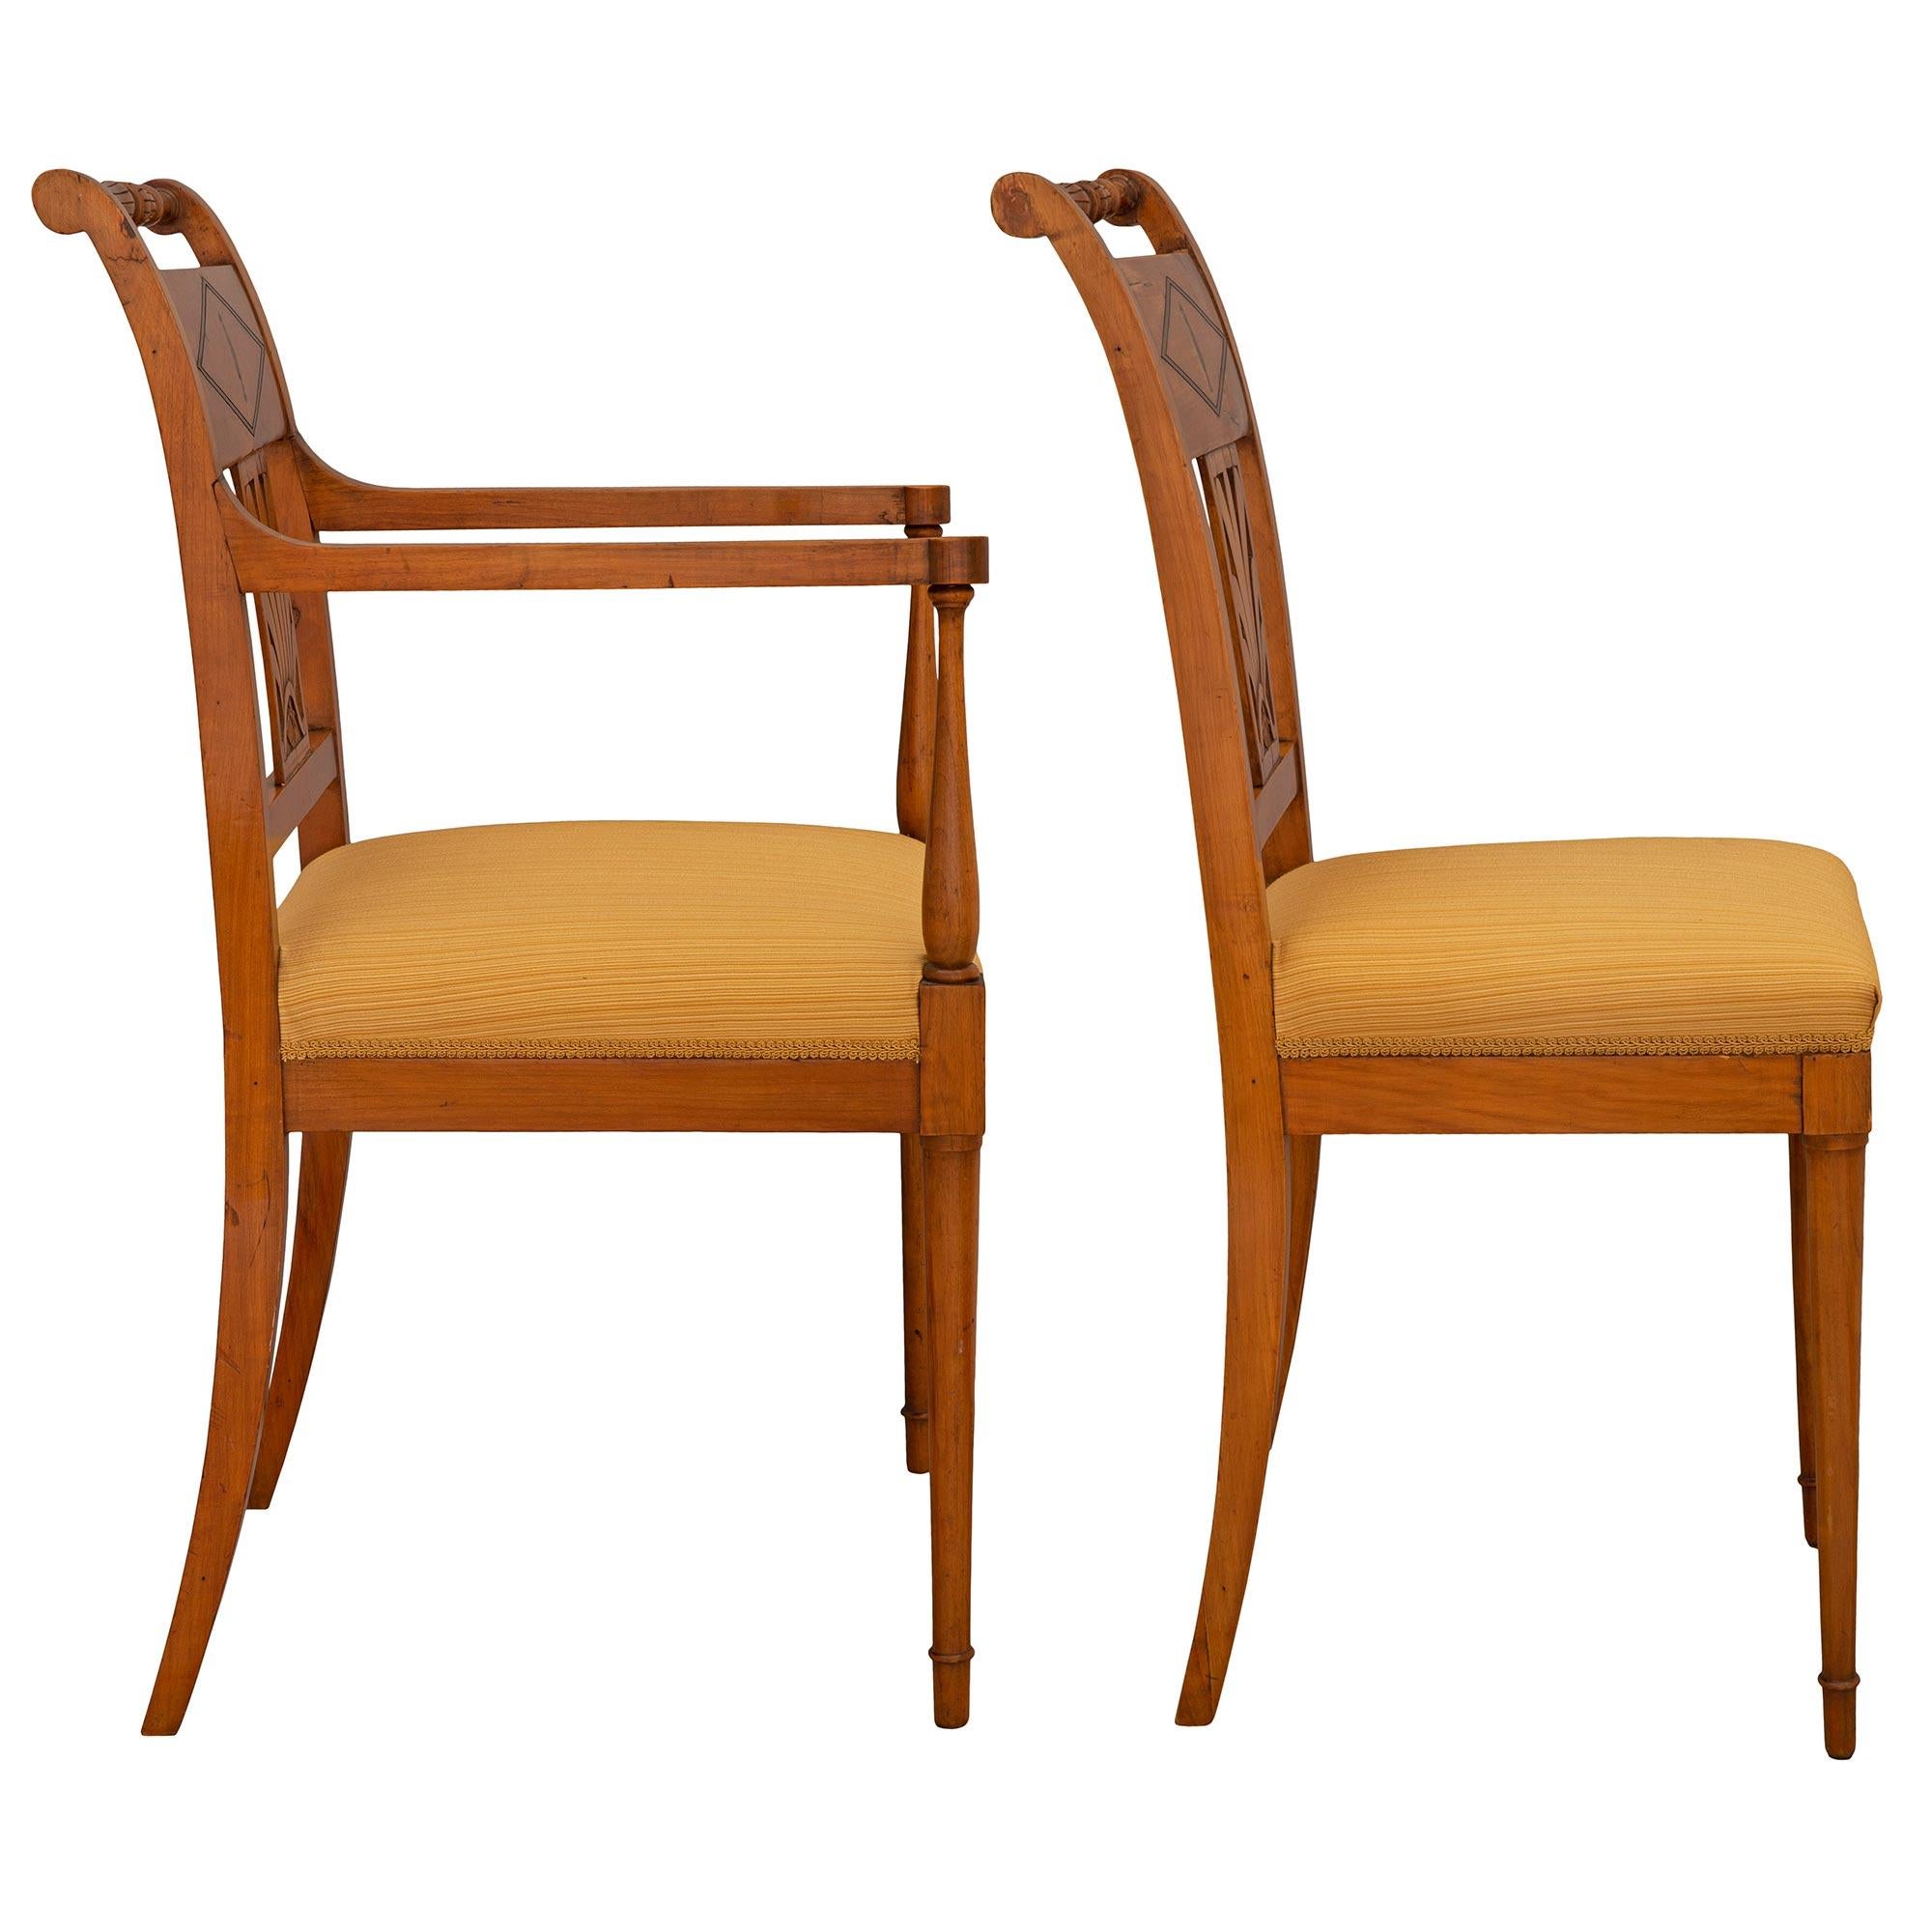 Ebonized Set of Mid-19th Century Biedermeier Dining Room Chairs For Sale